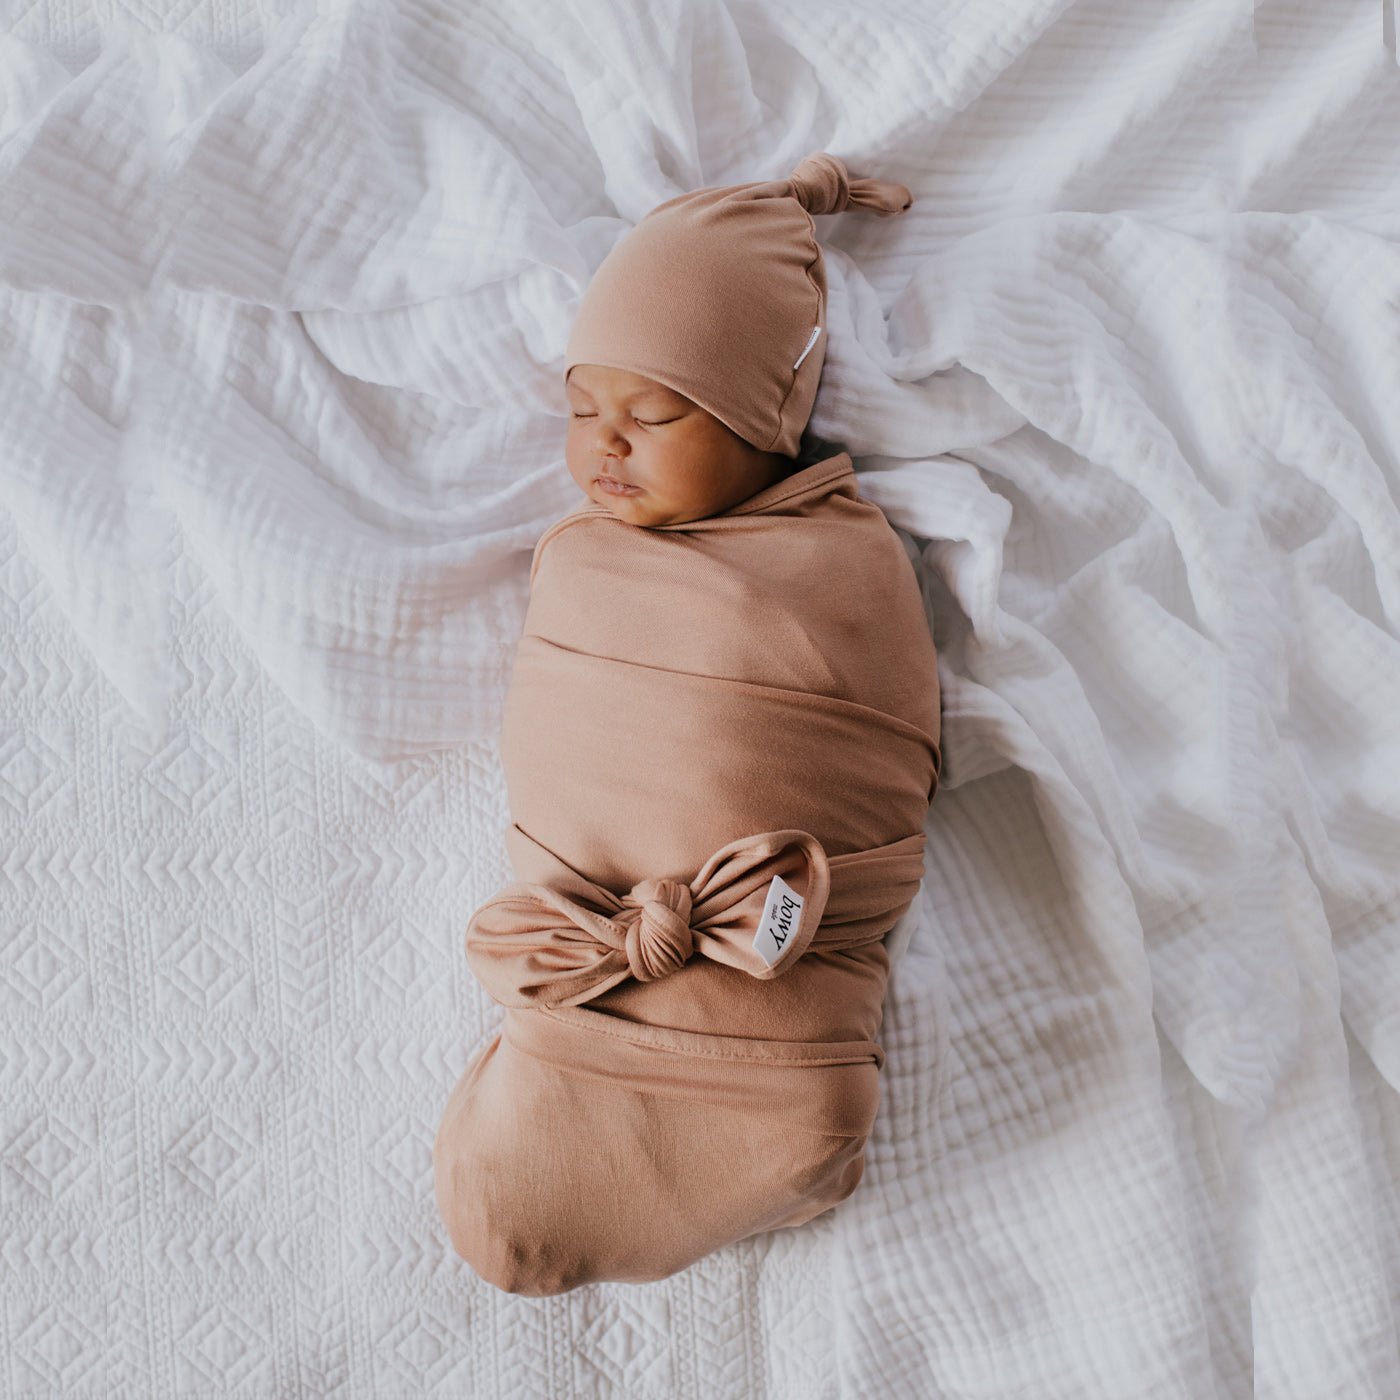 baby wrapped in tan colour swaddle